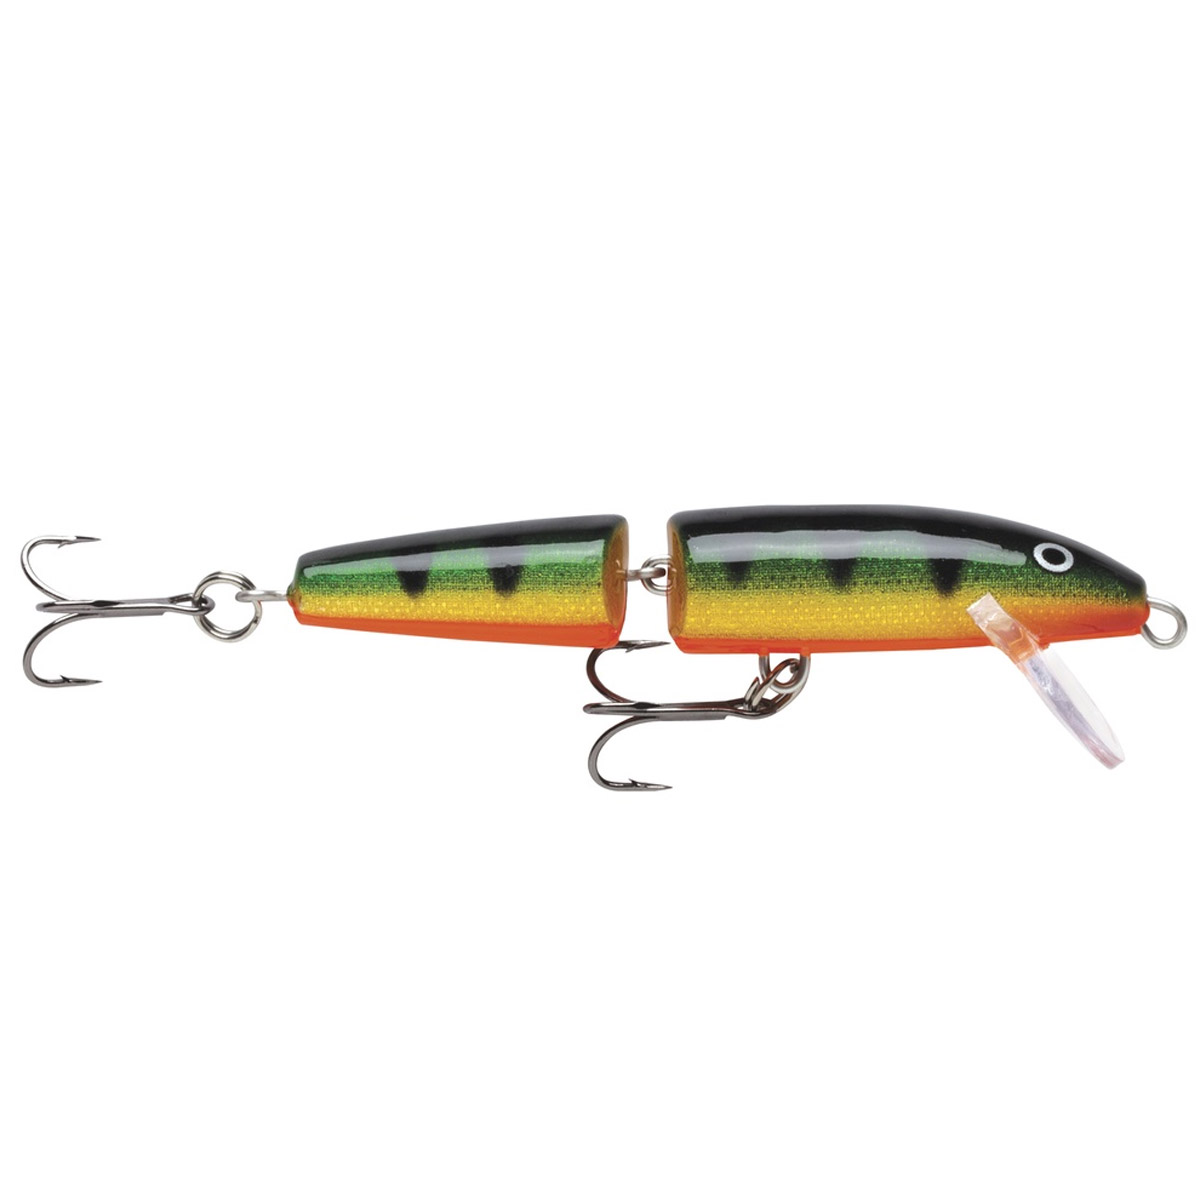 Rapala Jointed 7 CM